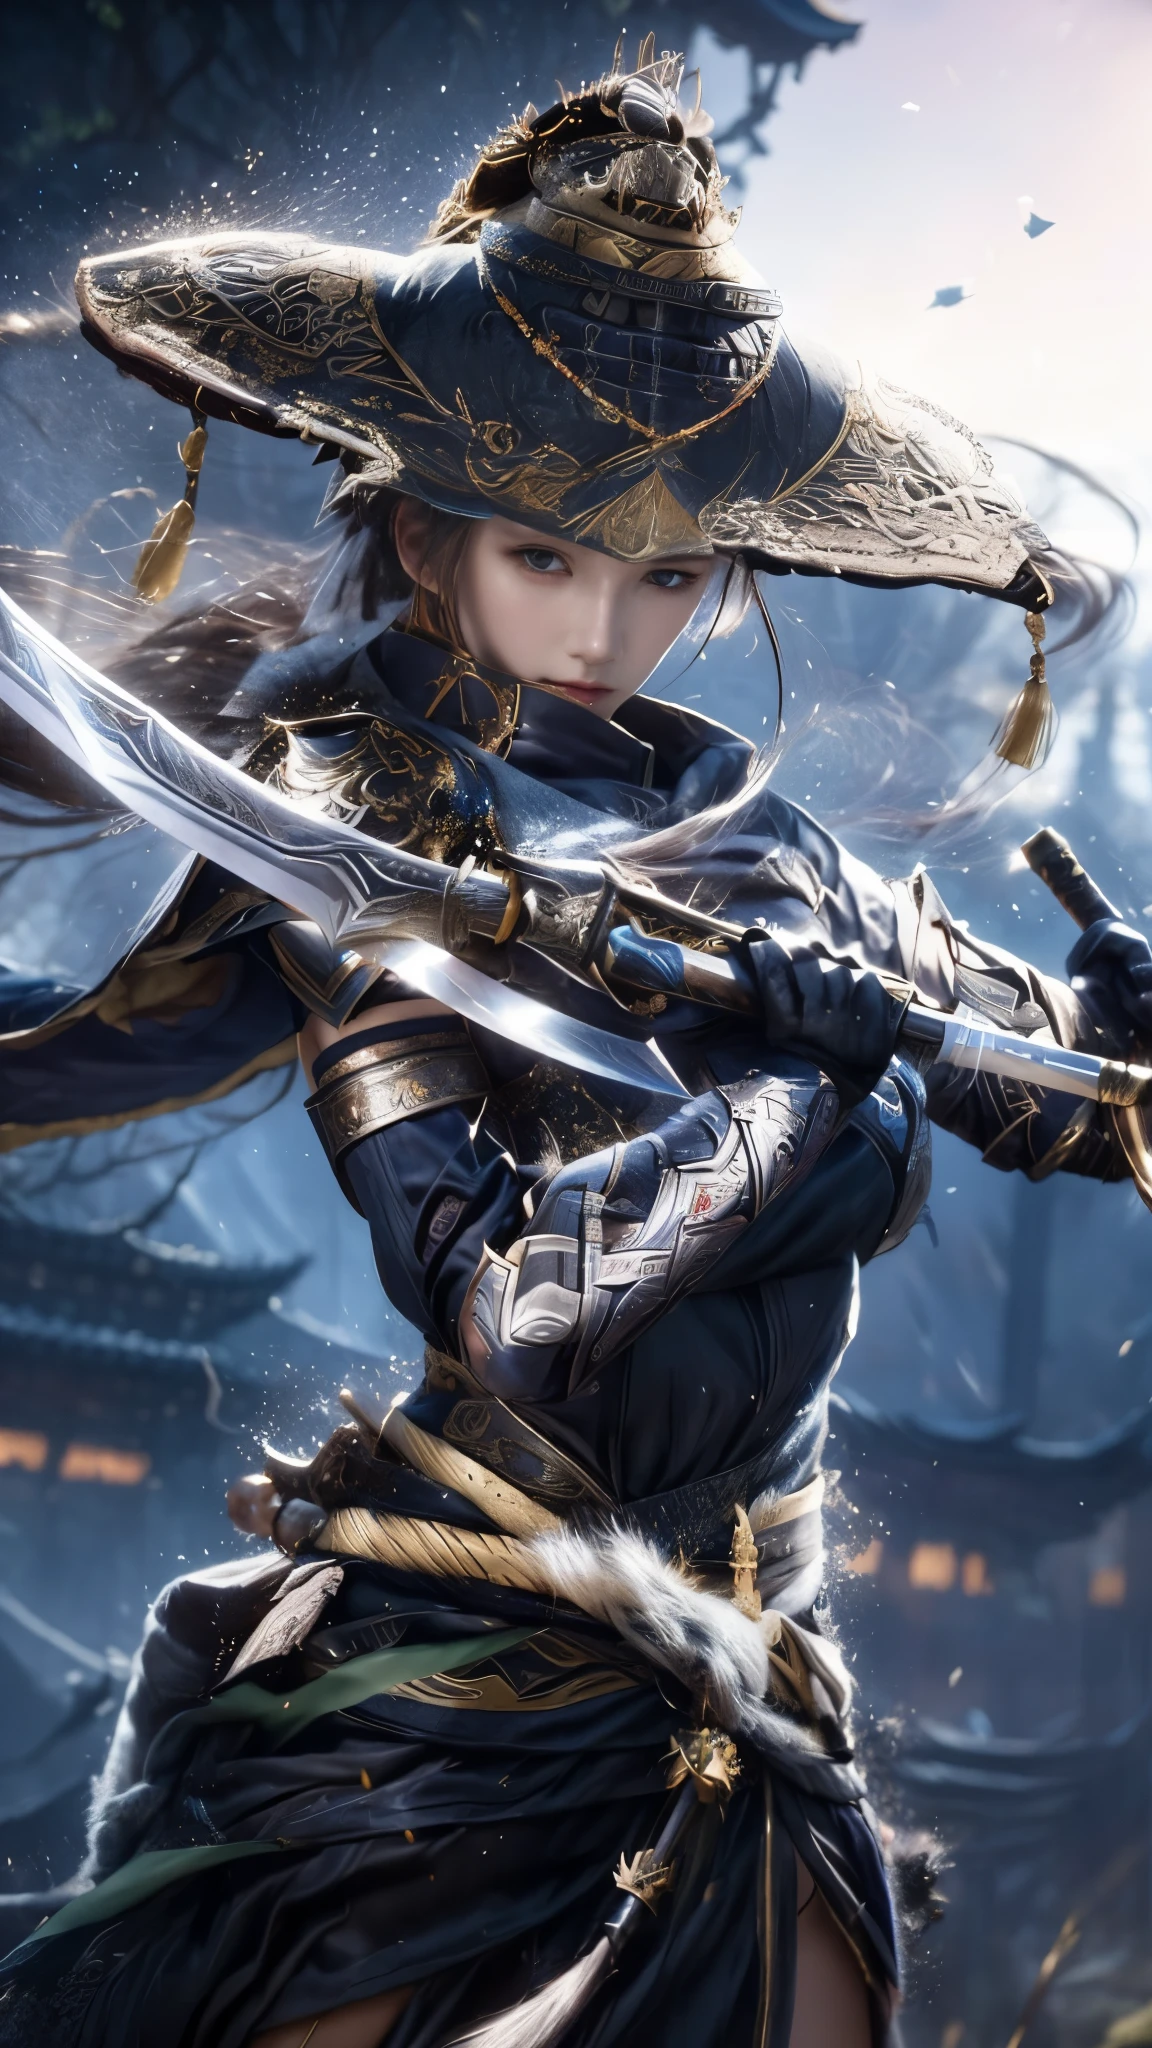 a woman in a hat and dress holding a sword, fantasy warrior, a fantasy warrior, female assassin, beautiful female assassin, ashe, female samurai, by Yang J, extremely detailed artgerm, trending digital fantasy art, epic exquisite character art, beautiful female warrior, inspired by Hong Ren, mystic ninja, chinese warrior, katana zero video game character